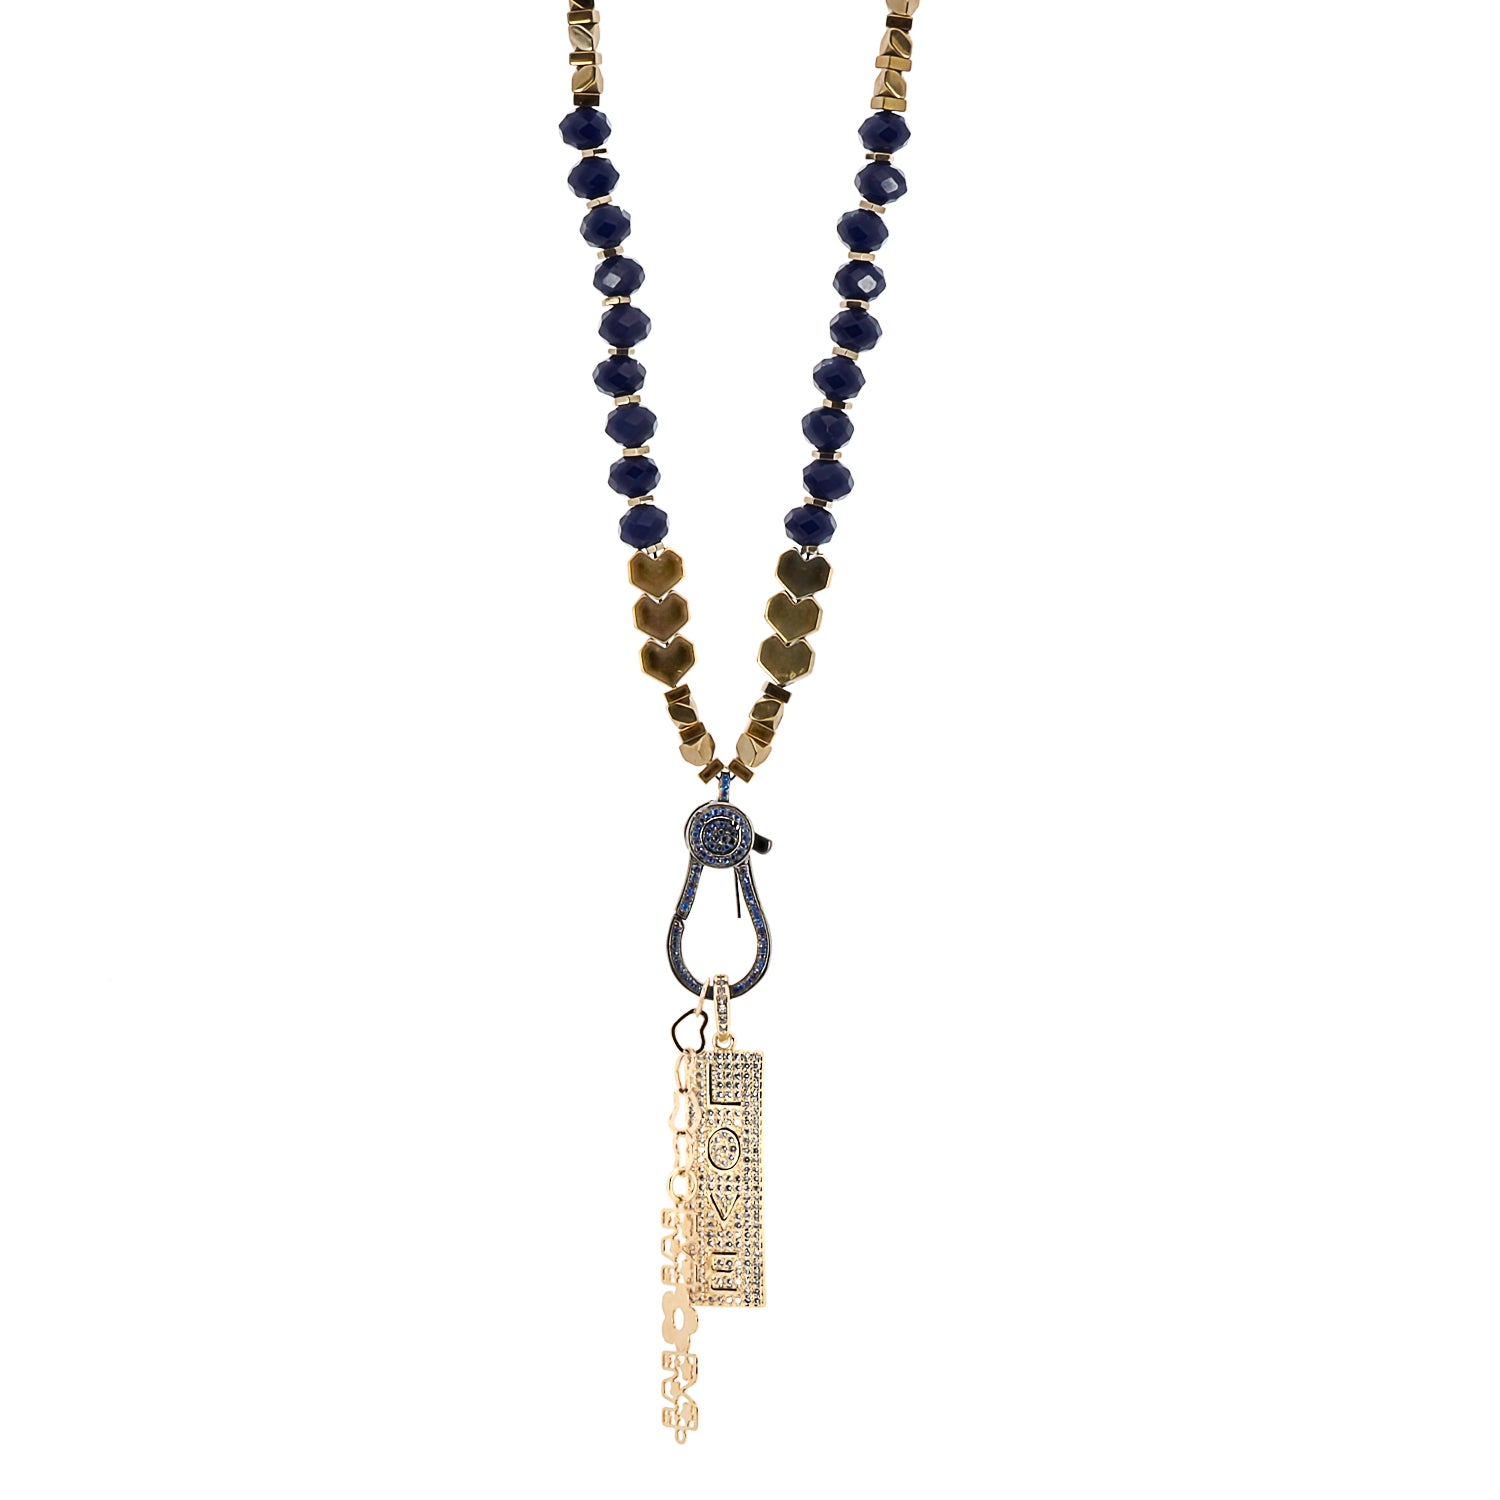 Necklace featuring blue crystals and gold hematite stone heart beads